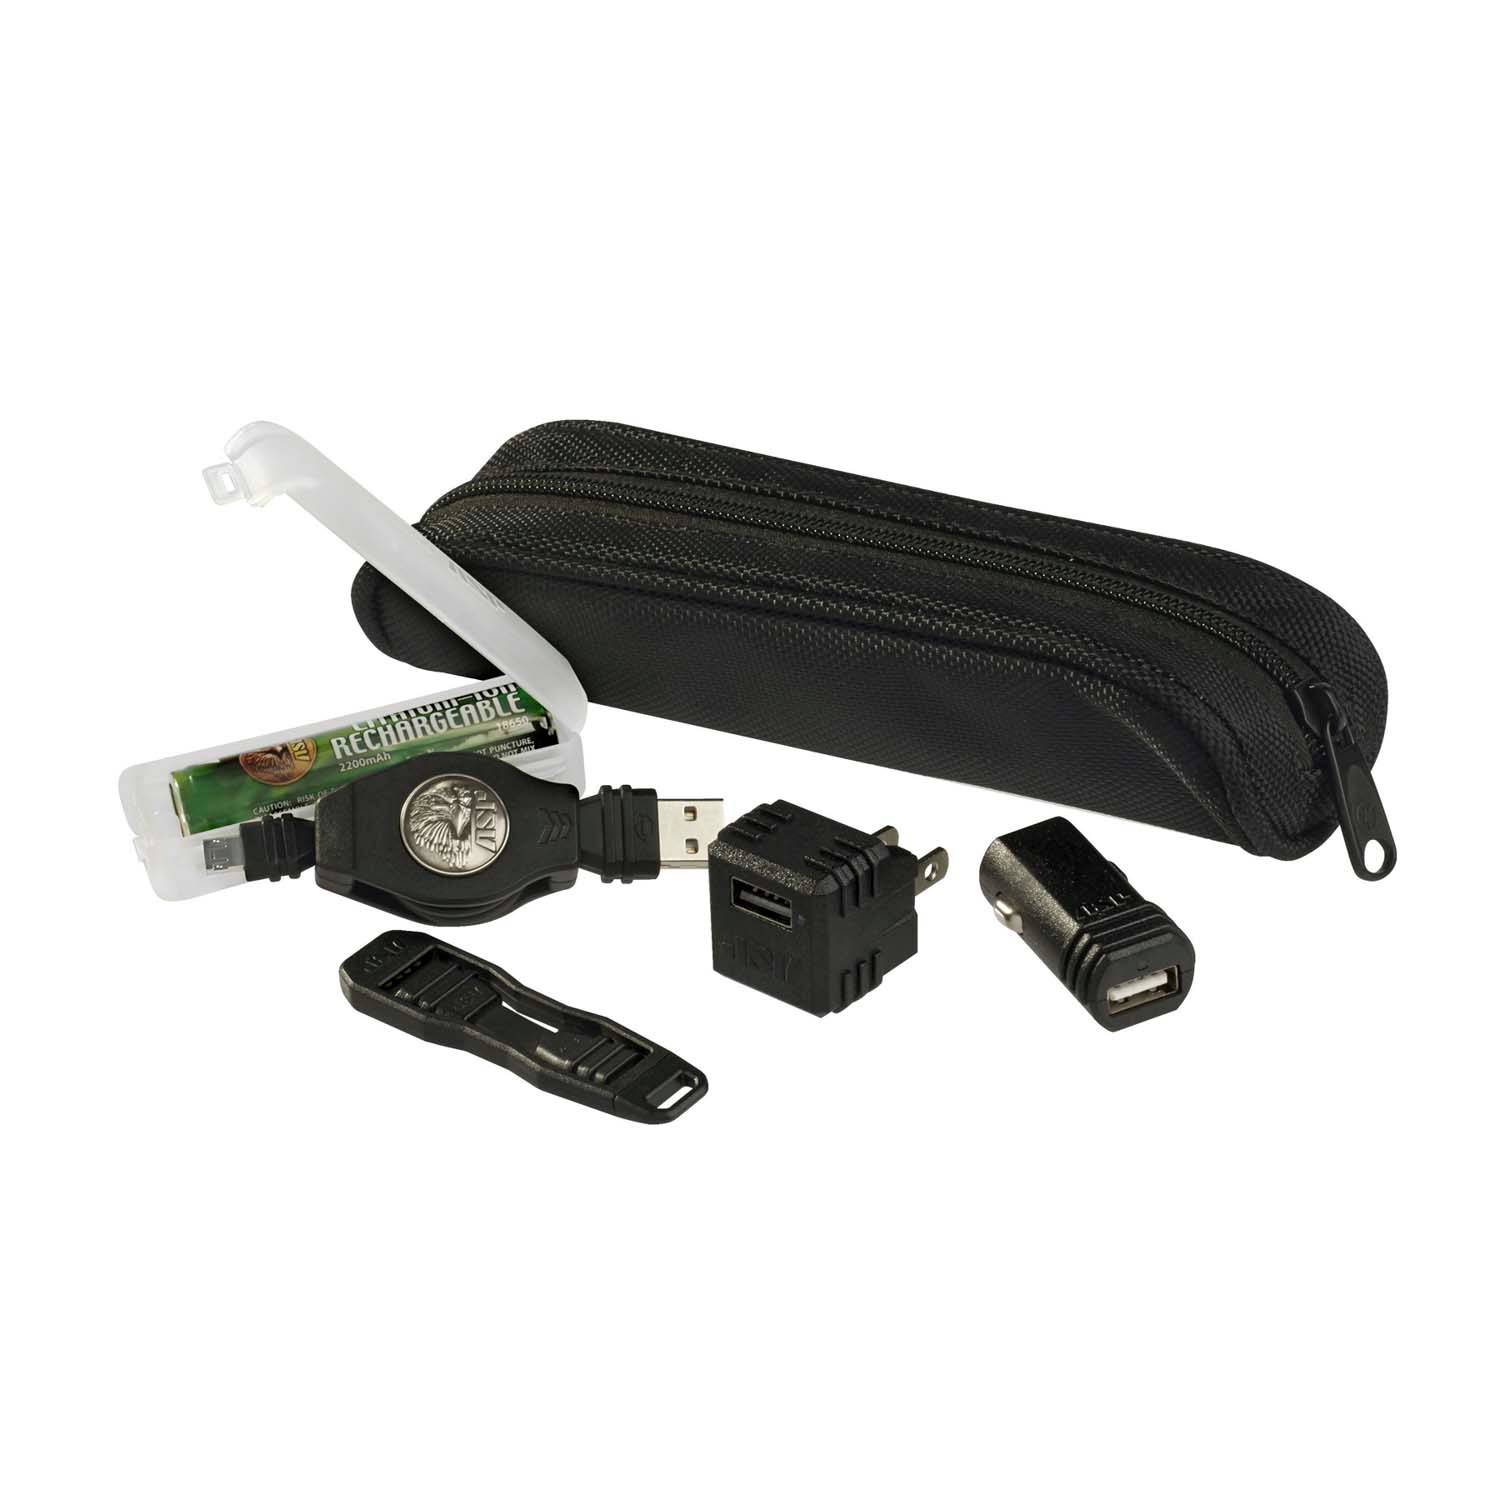 ASP 18650 Dual Fuel Charge Kit (US)